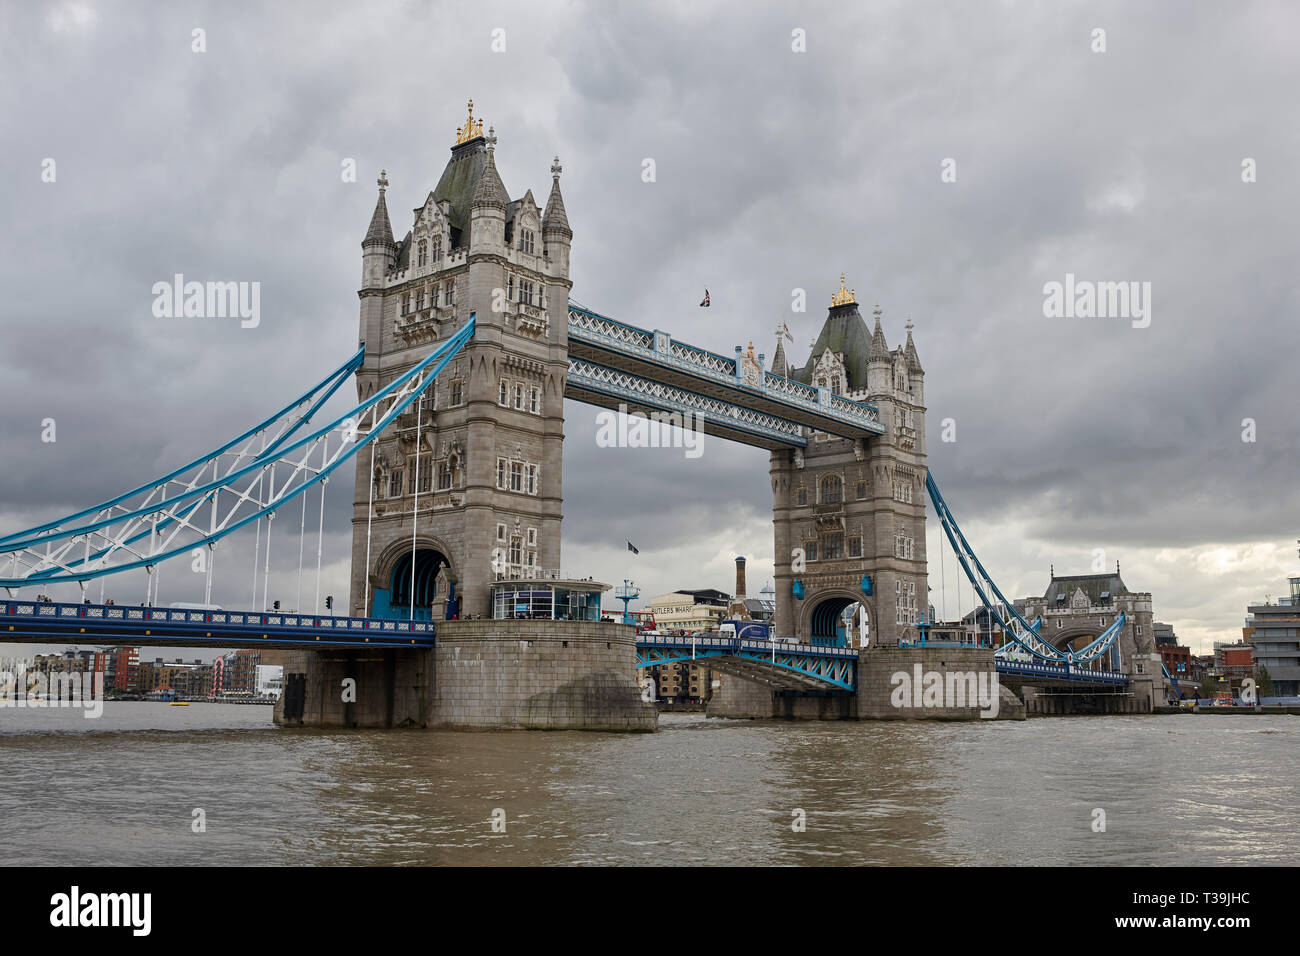 London's iconic Tower Bridge on an overcast day, viewed from the Tower of London on the north bank of the River Thames, London, England, UK. Stock Photo